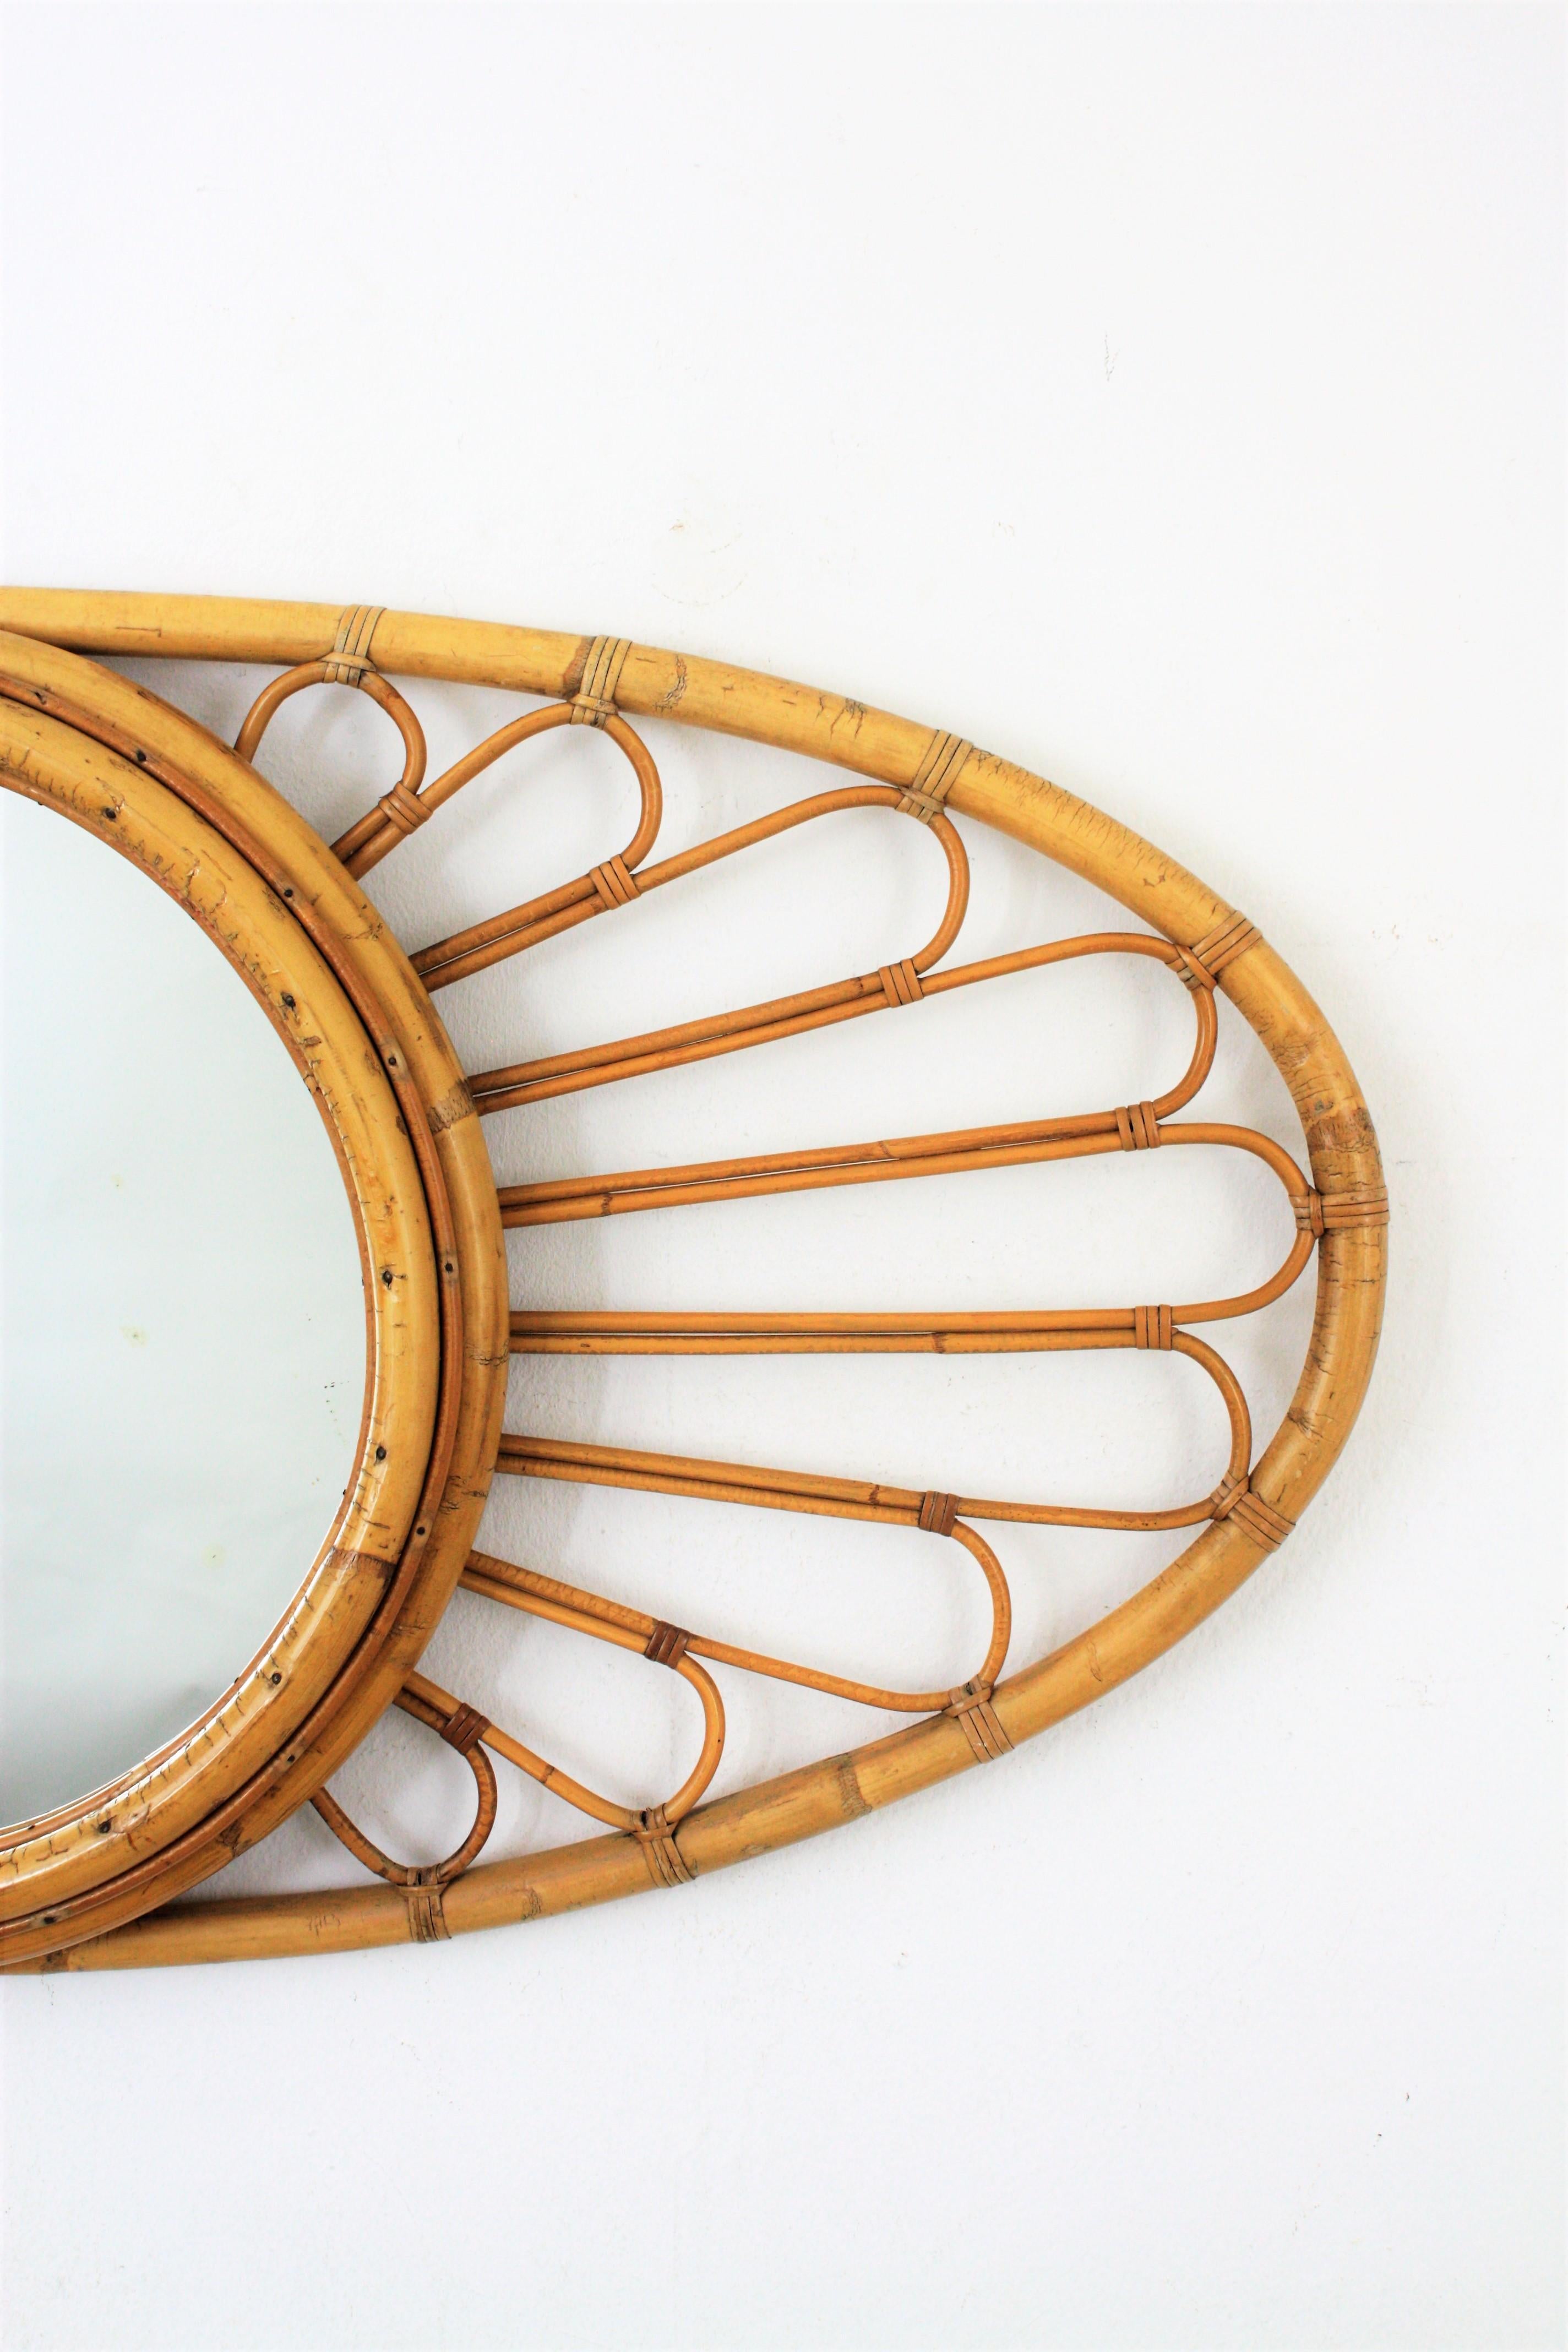 20th Century Bamboo Rattan Oval Mirror, Spain, 1960s For Sale